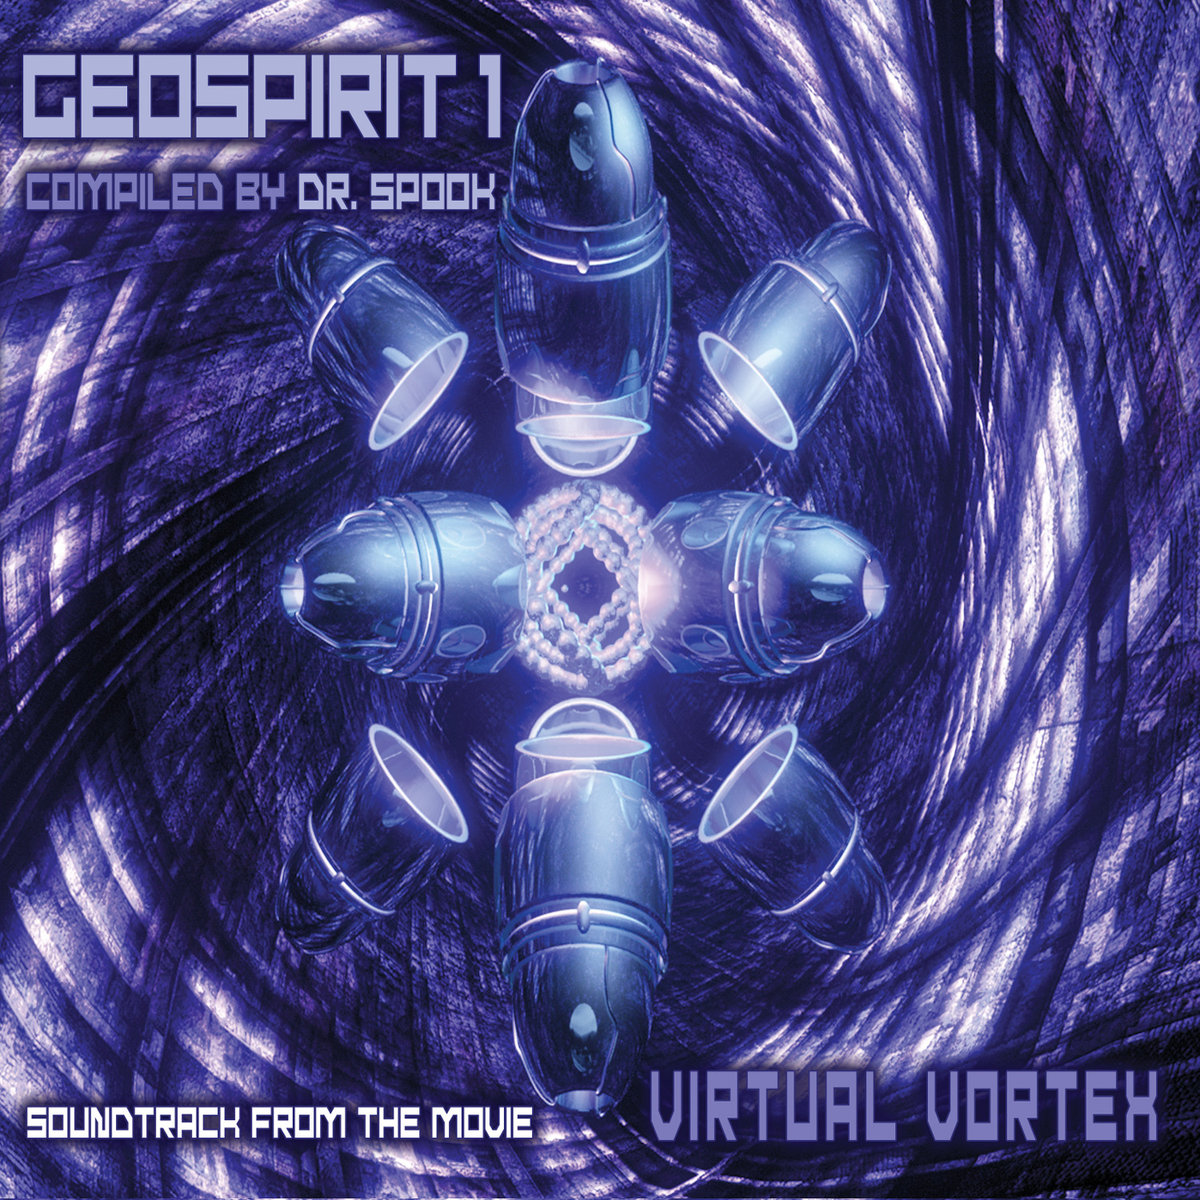 Nomad & Jeremy Tsunami - High Volume @ 'Various Artists - Geospirit 1: Virtual Vortex (Compiled by Dr. Spook)' album (electronic, goa)